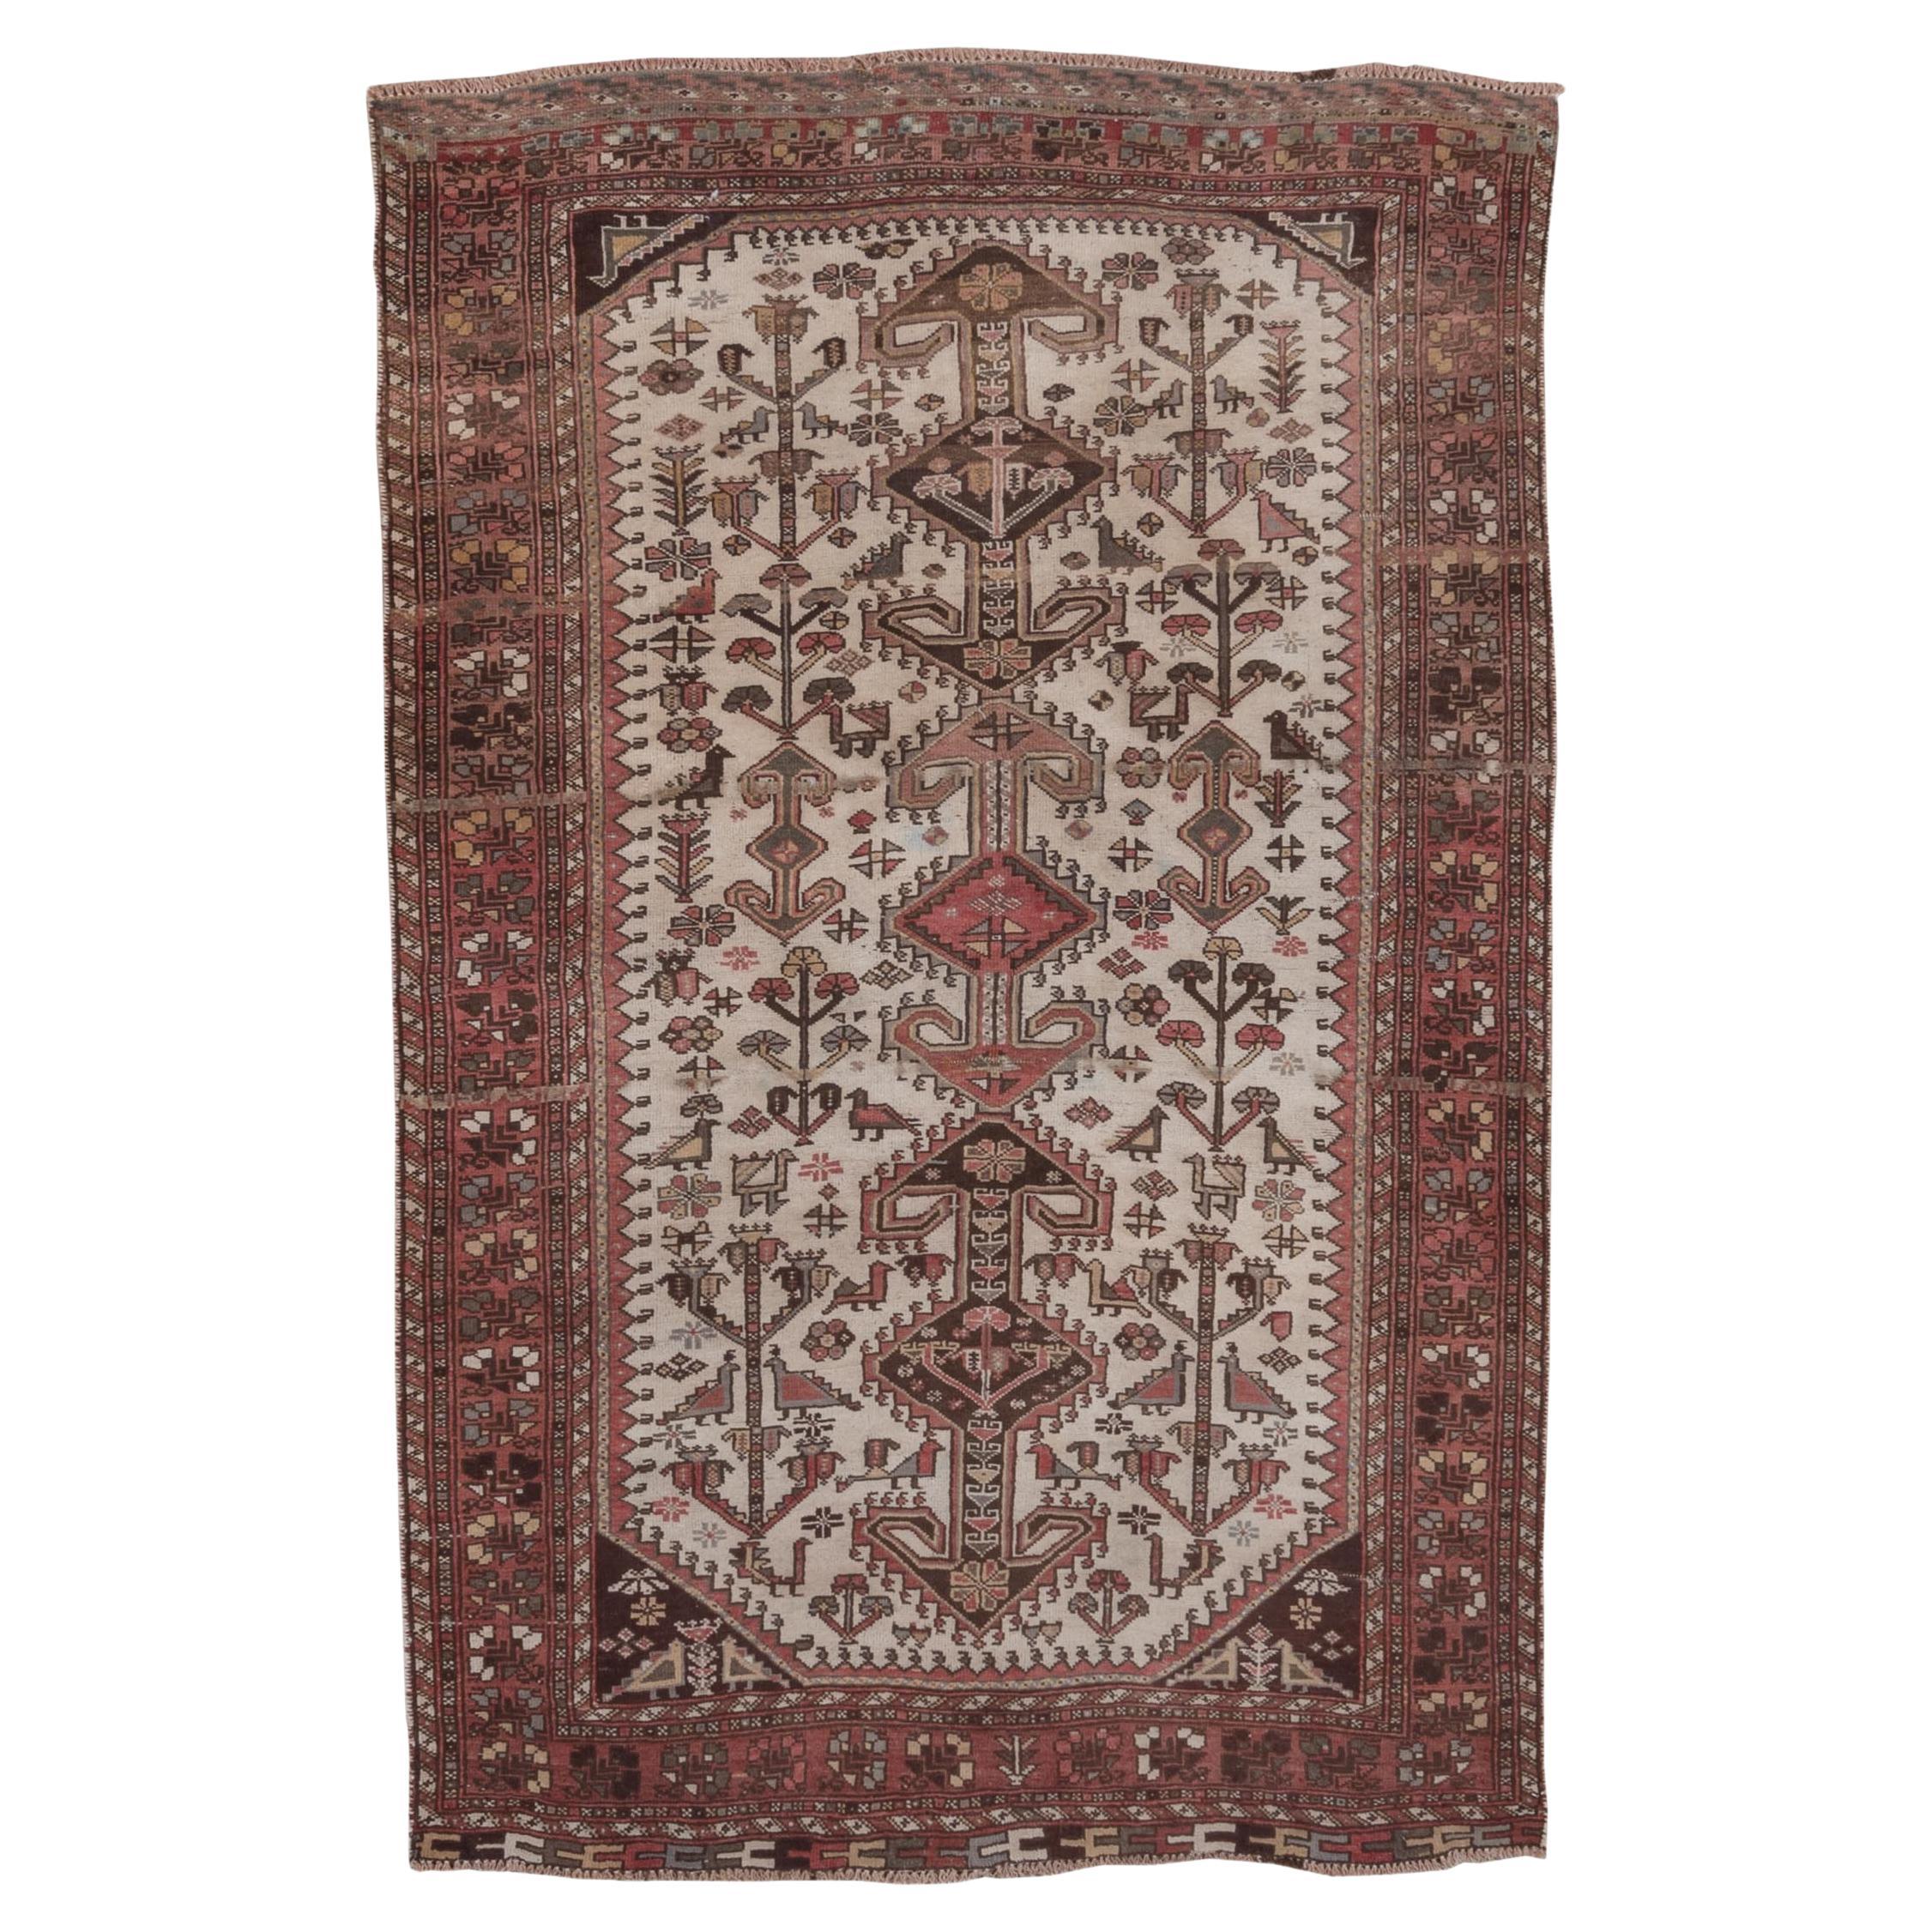 Persian Antique Rug Circa 1940s in Multicolor Traditional Wool Hand Knotted